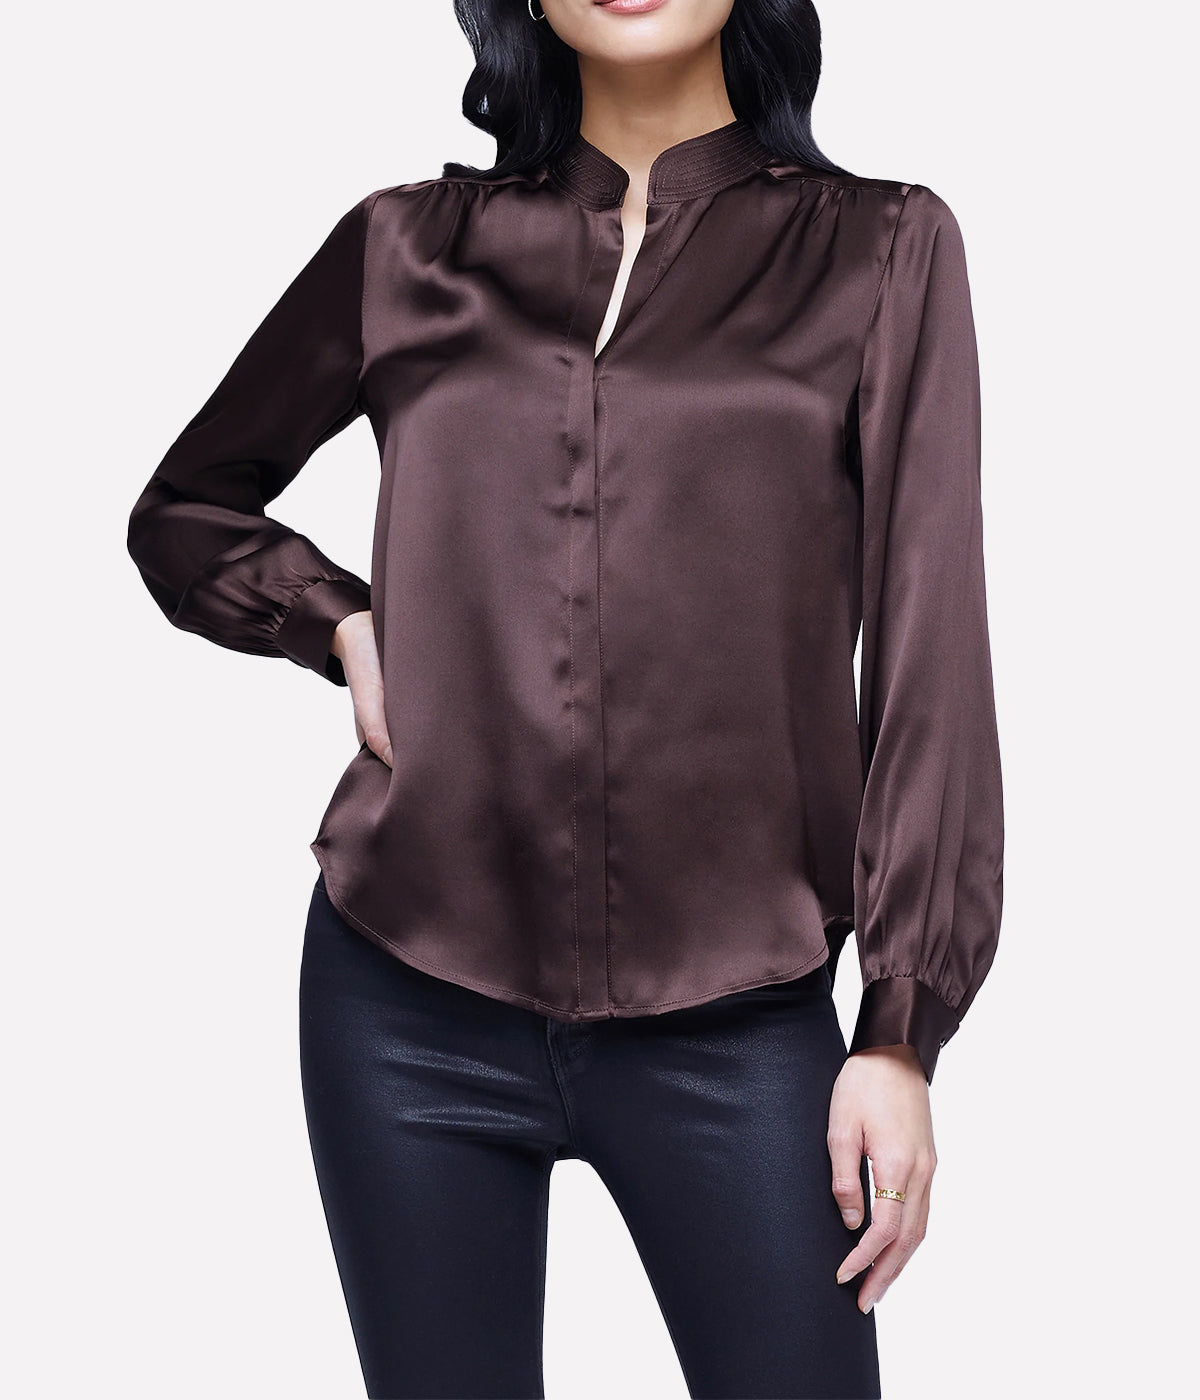 Bianca Long Sleeve Blouse in Chocolate